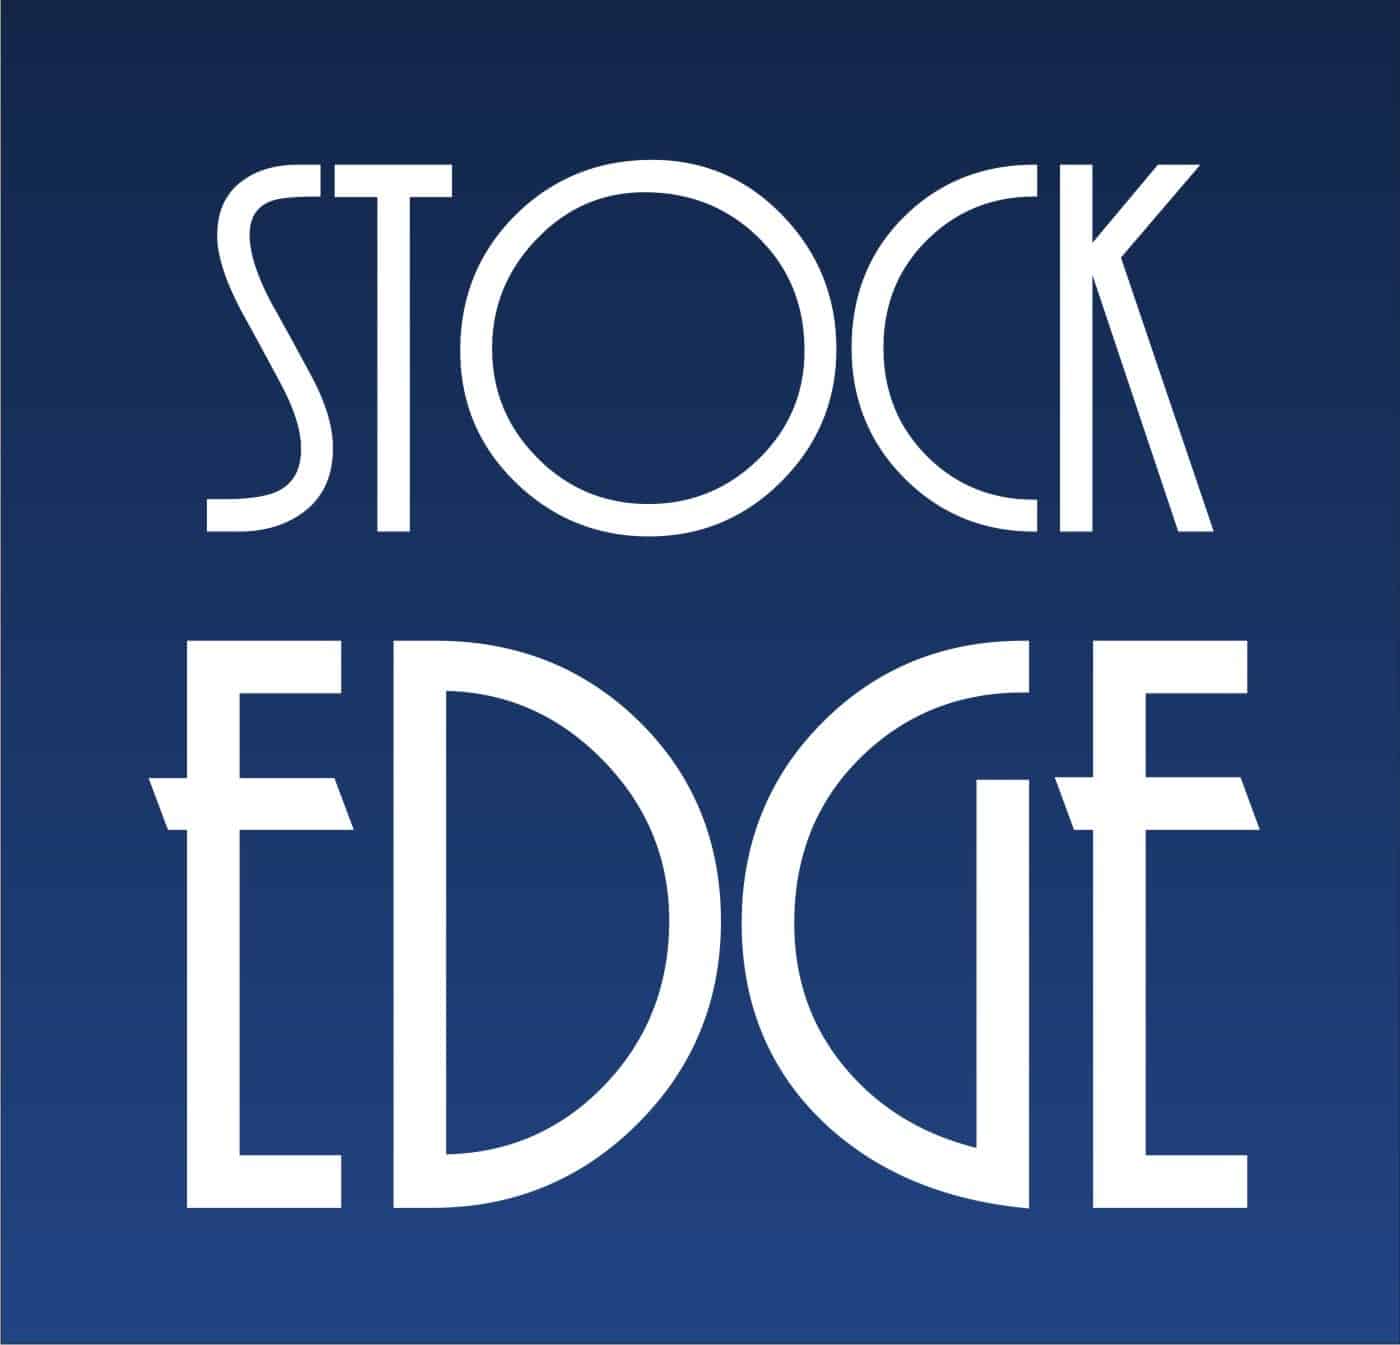 StockEdge Statistics and Facts 2022